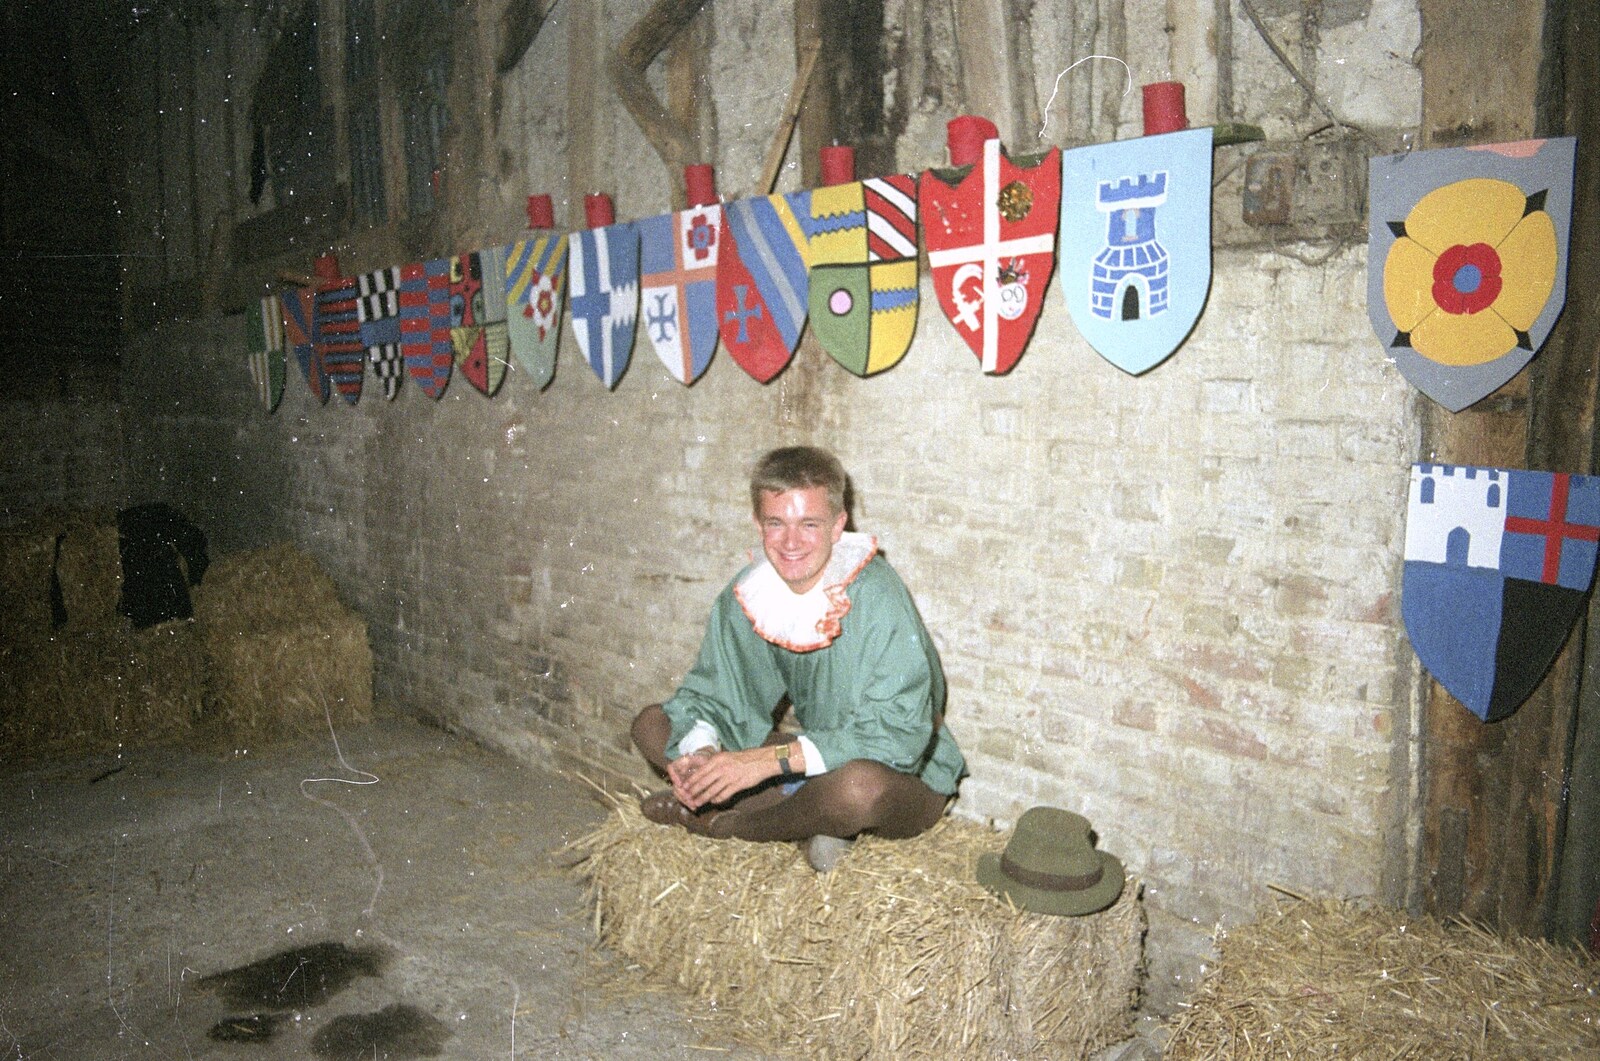 Nosher's on a bale of straw, like a gnome from A Mediaeval Birthday Party, Starston, Norfolk - 27th July 1990